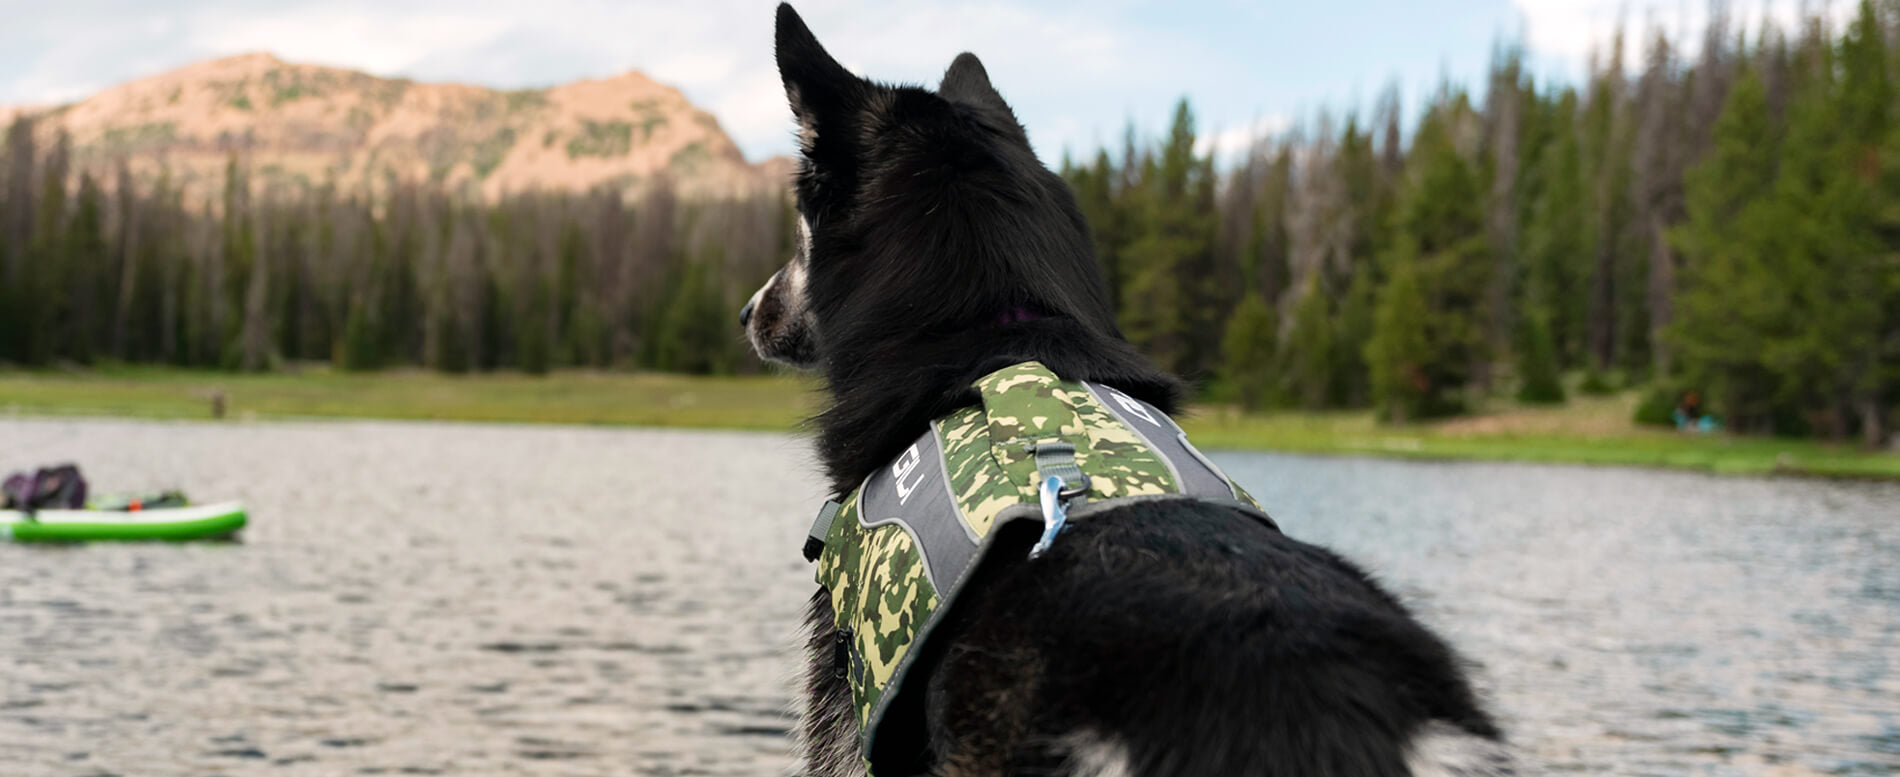 Outward Hound Granby Dog Life Jacket - Safe, Durable & Ready For Adventure  